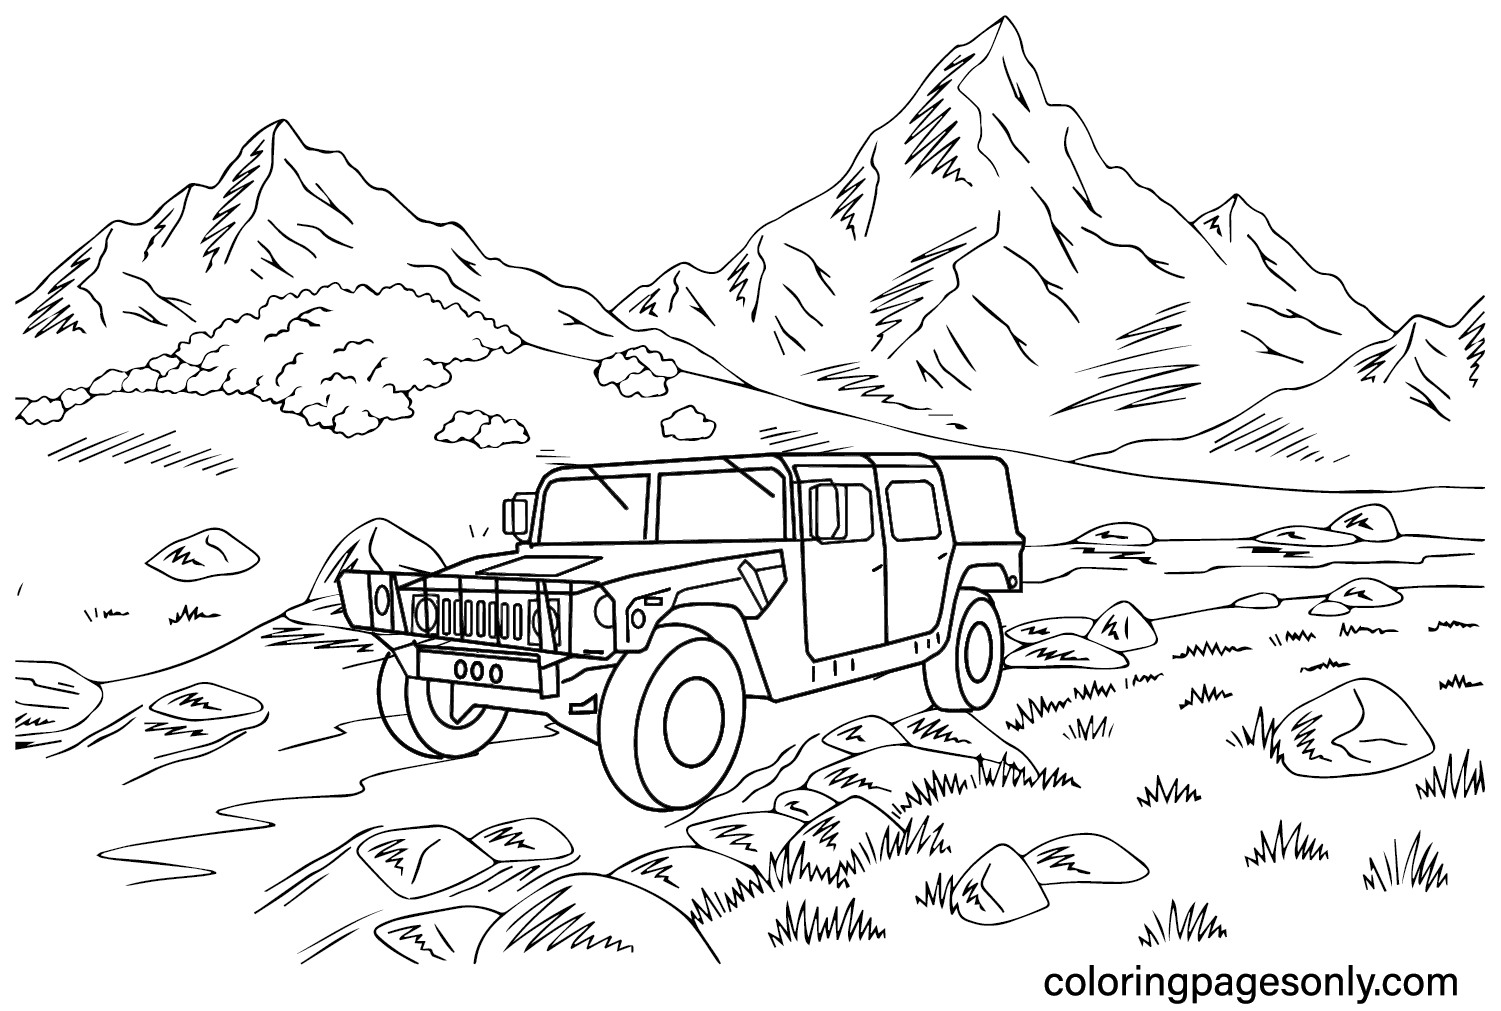 Hummer Car Coloring Page - Free Printable Coloring Pages